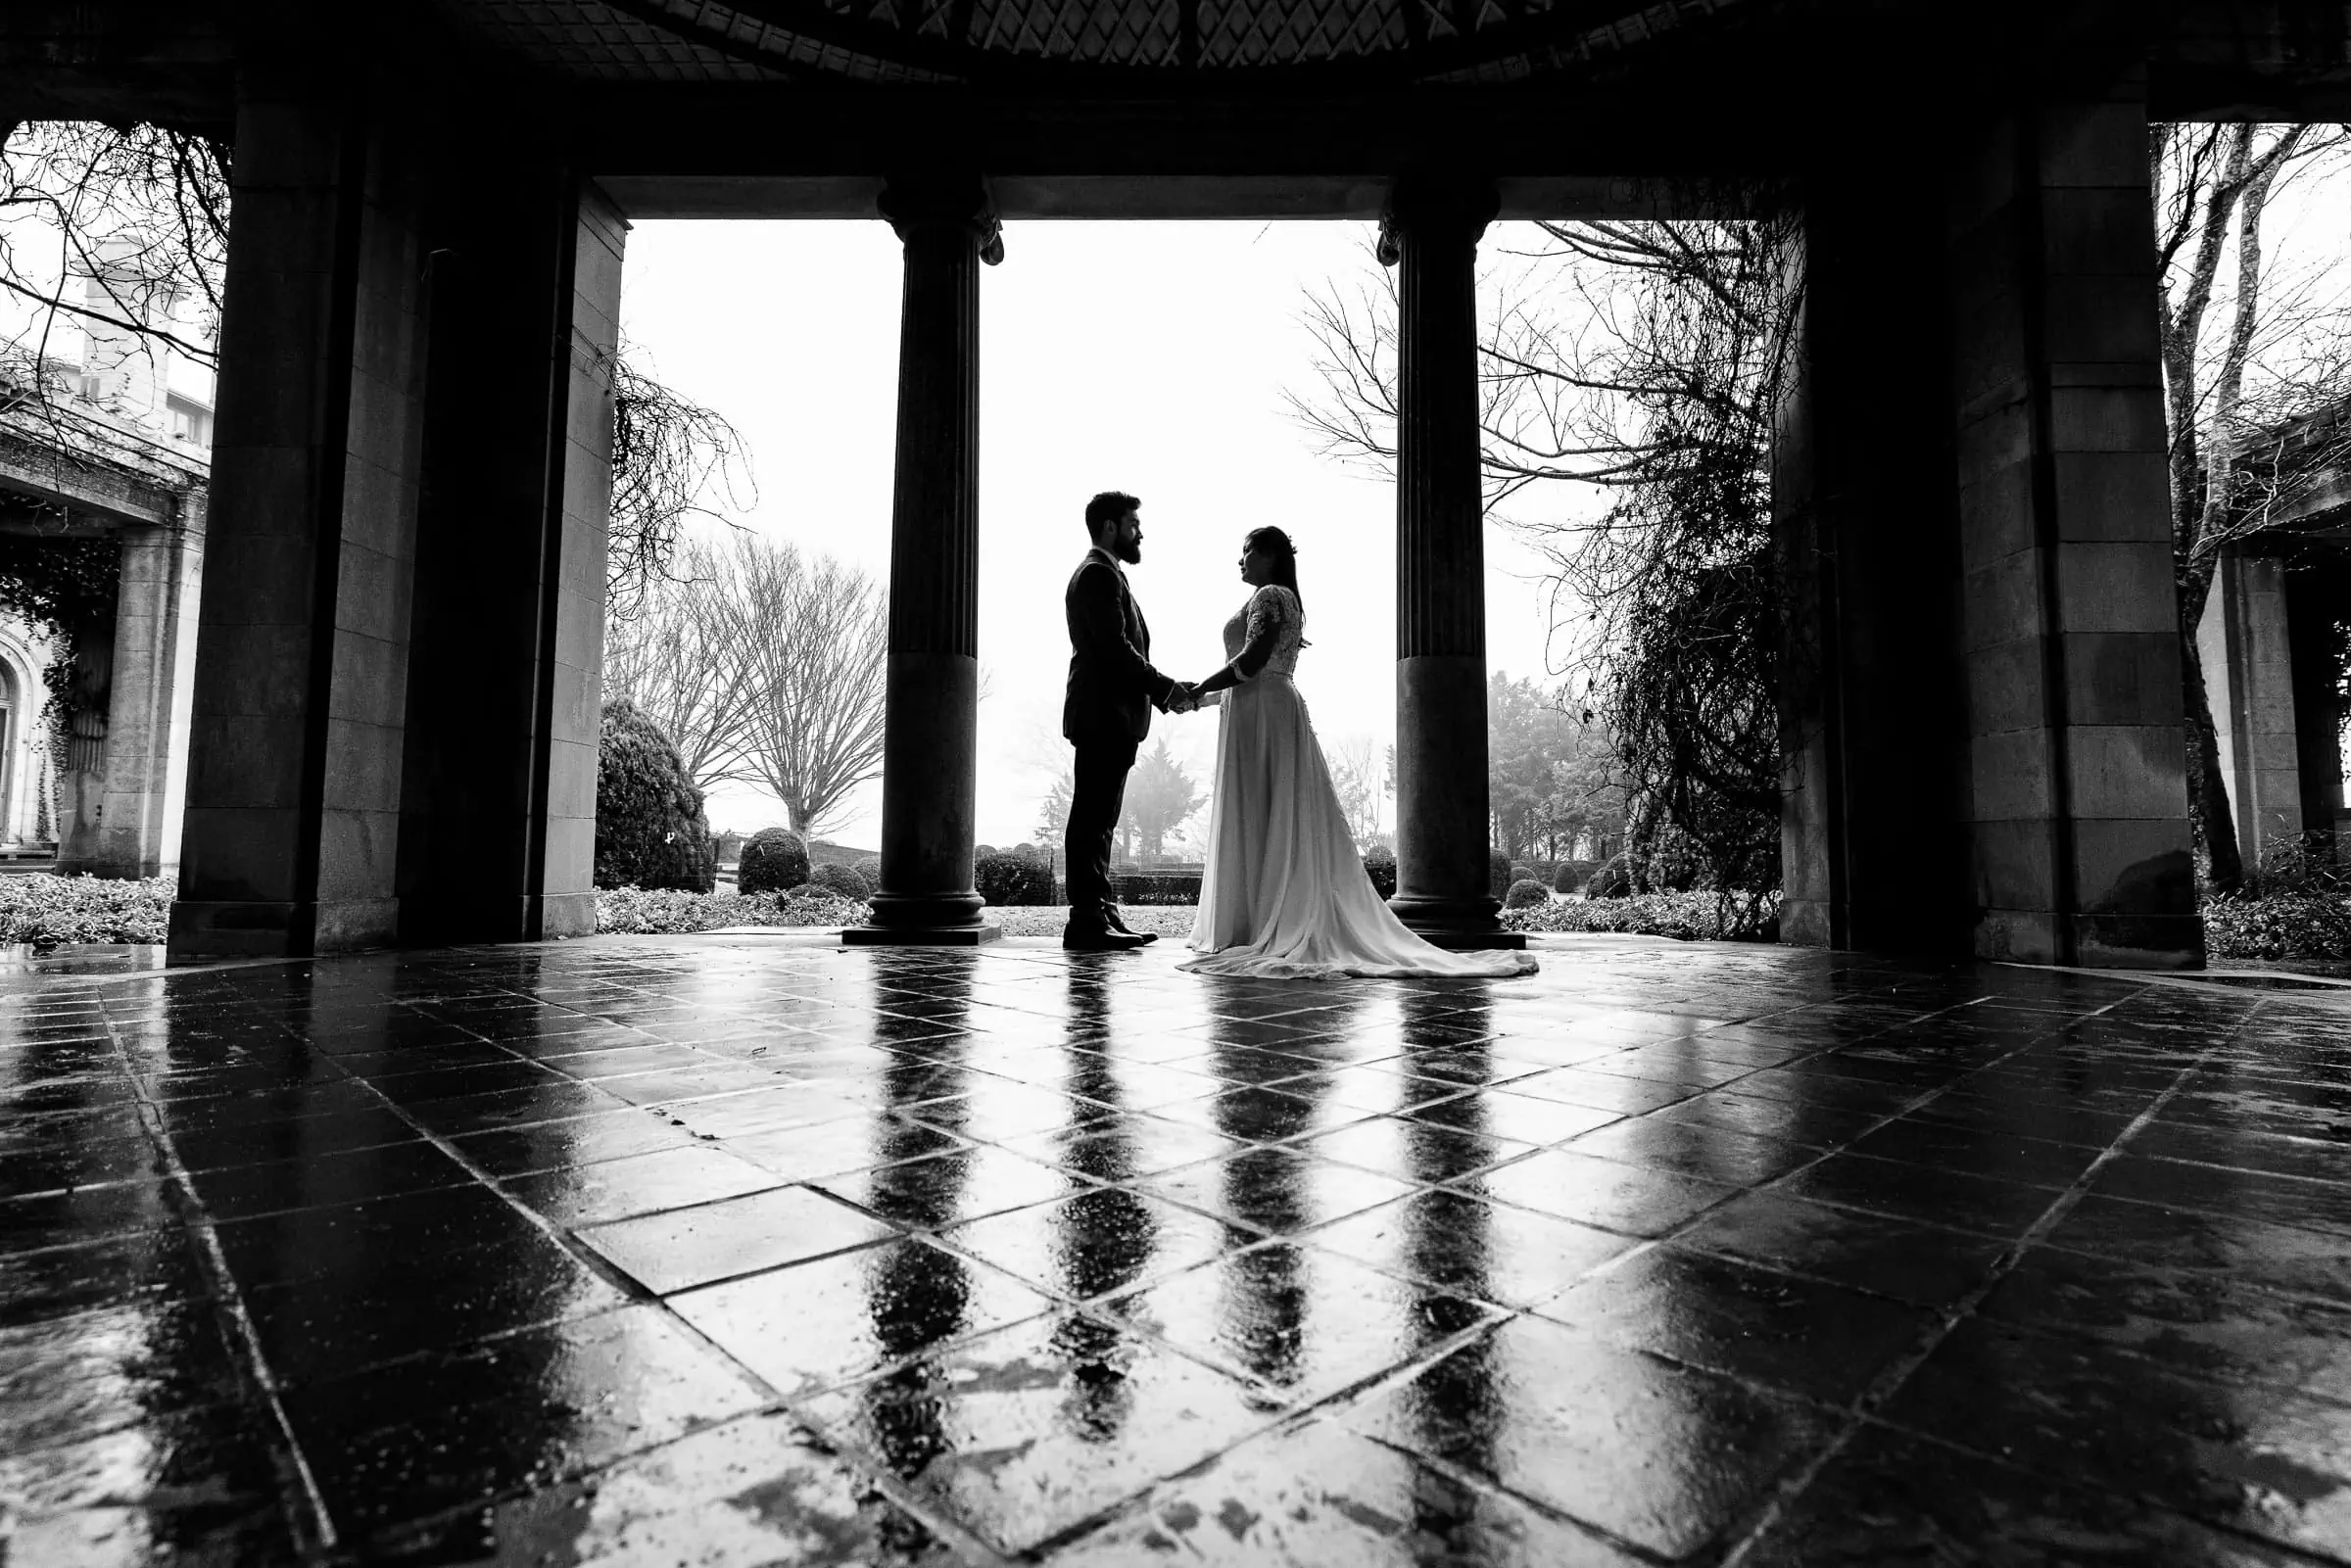 A man and woman in silhouette under a stone structure with a wet floor